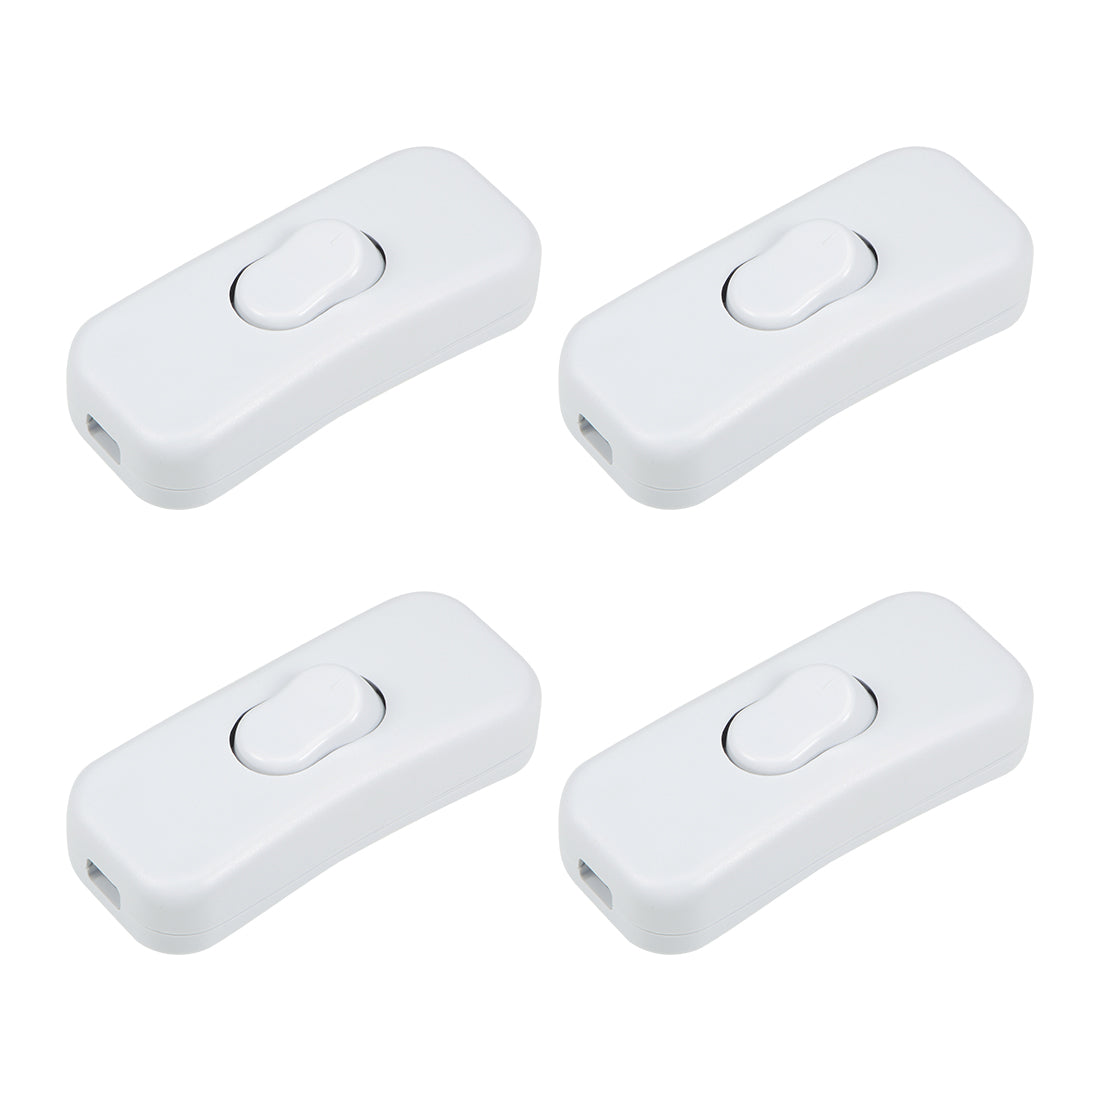 uxcell Uxcell Inline Cord Switch AC 250V 2A 500W DPST On/Off Rocker Switch Table Lamp Desk Light Switch, White 4pcs